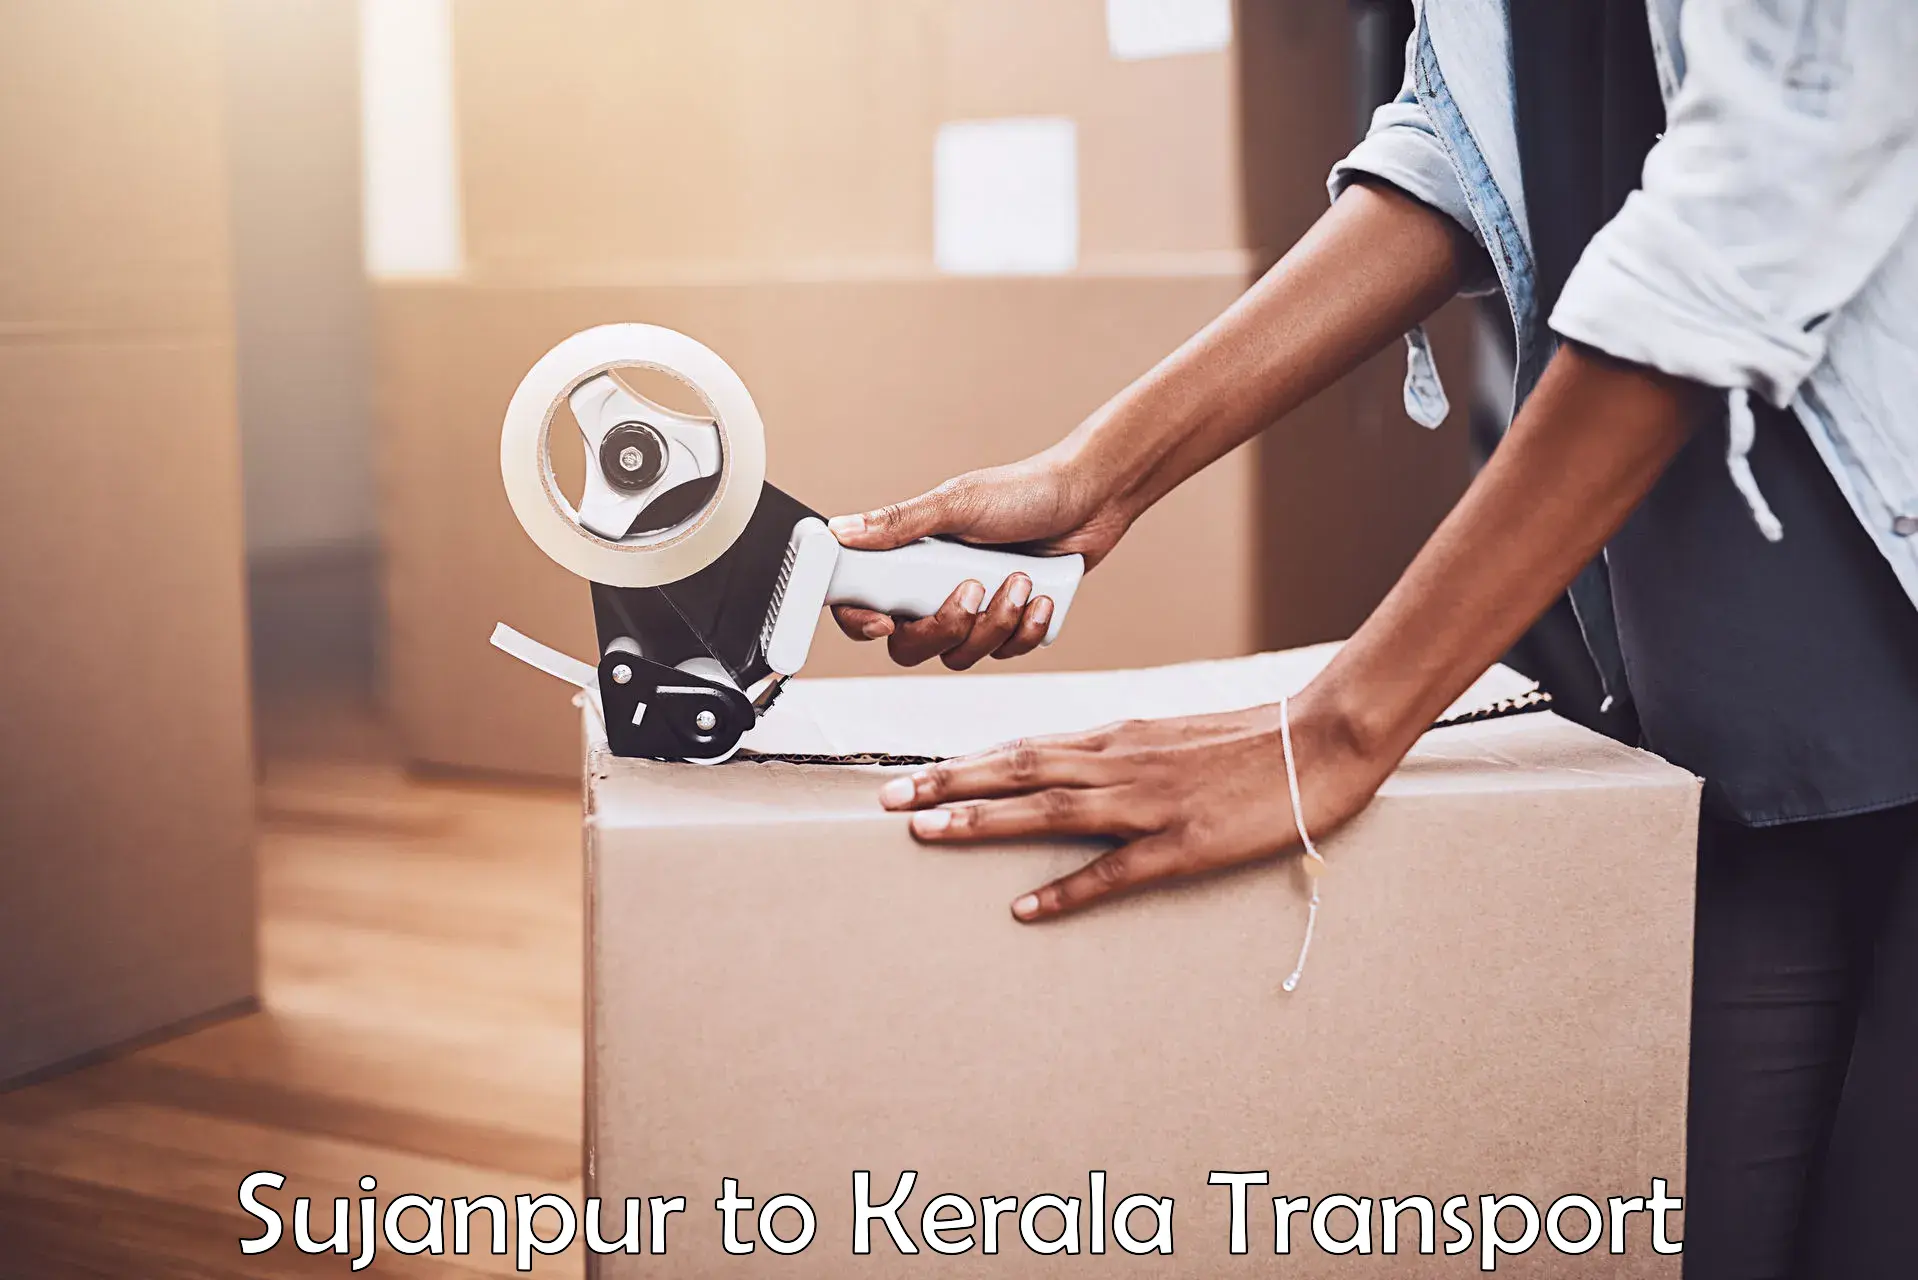 Nearby transport service in Sujanpur to Pandikkad